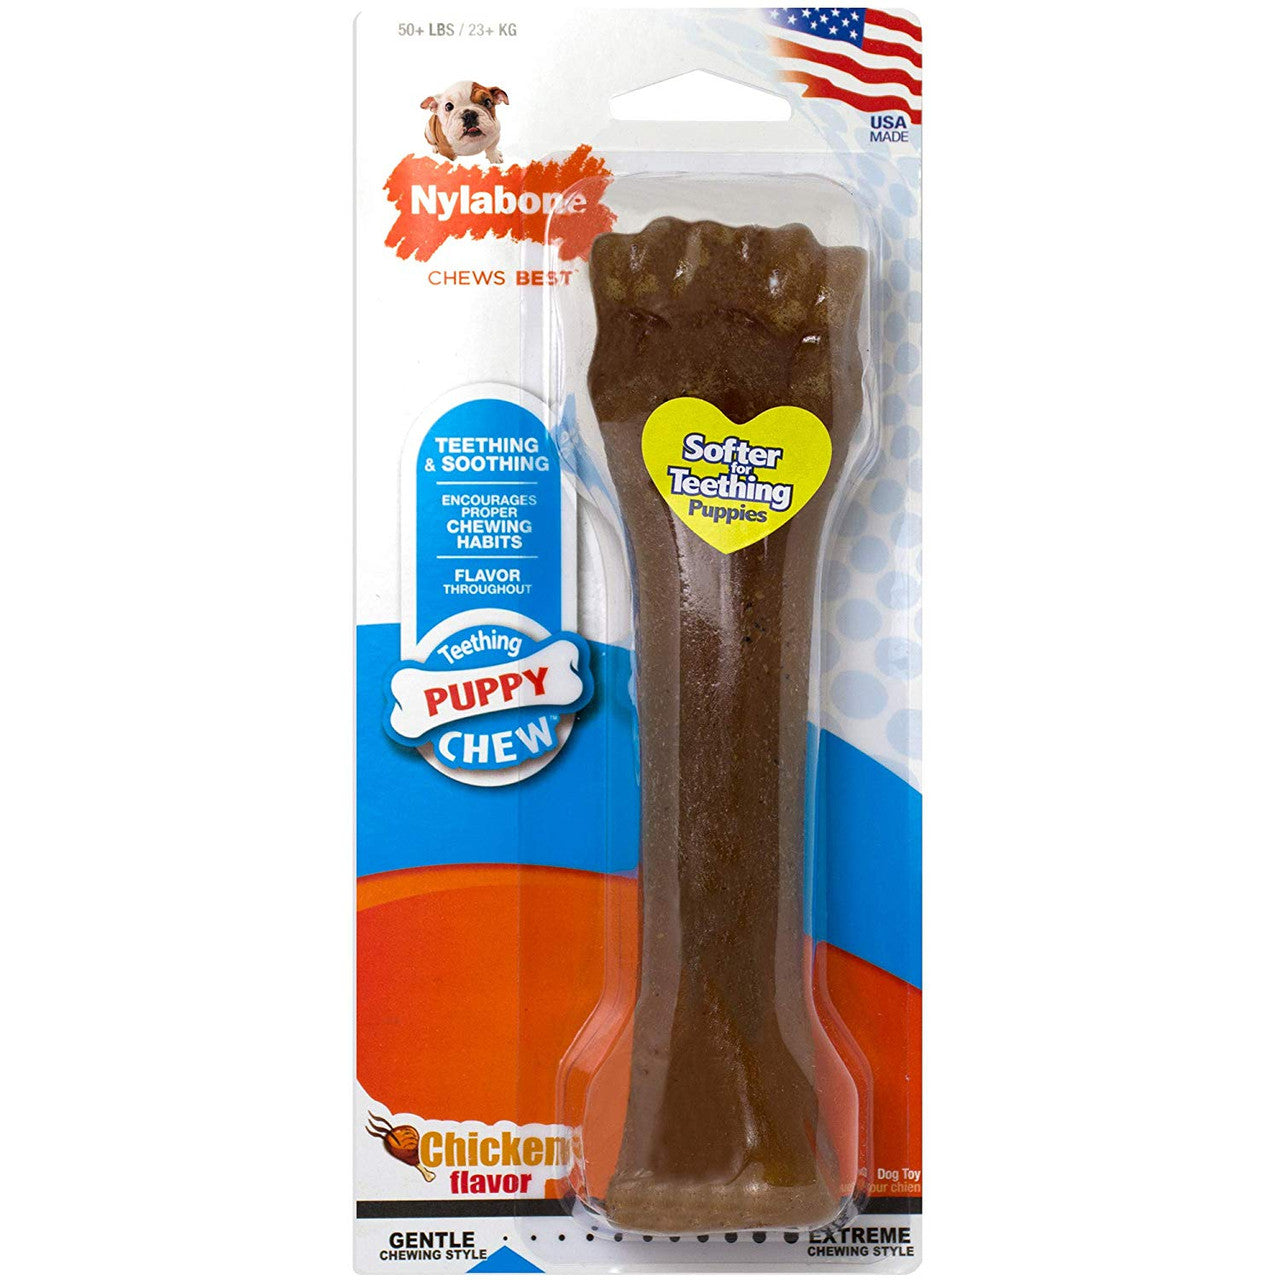 Nylabone Just for Puppies Teething Chew Toy Chicken X-Large/Souper (1 Count)